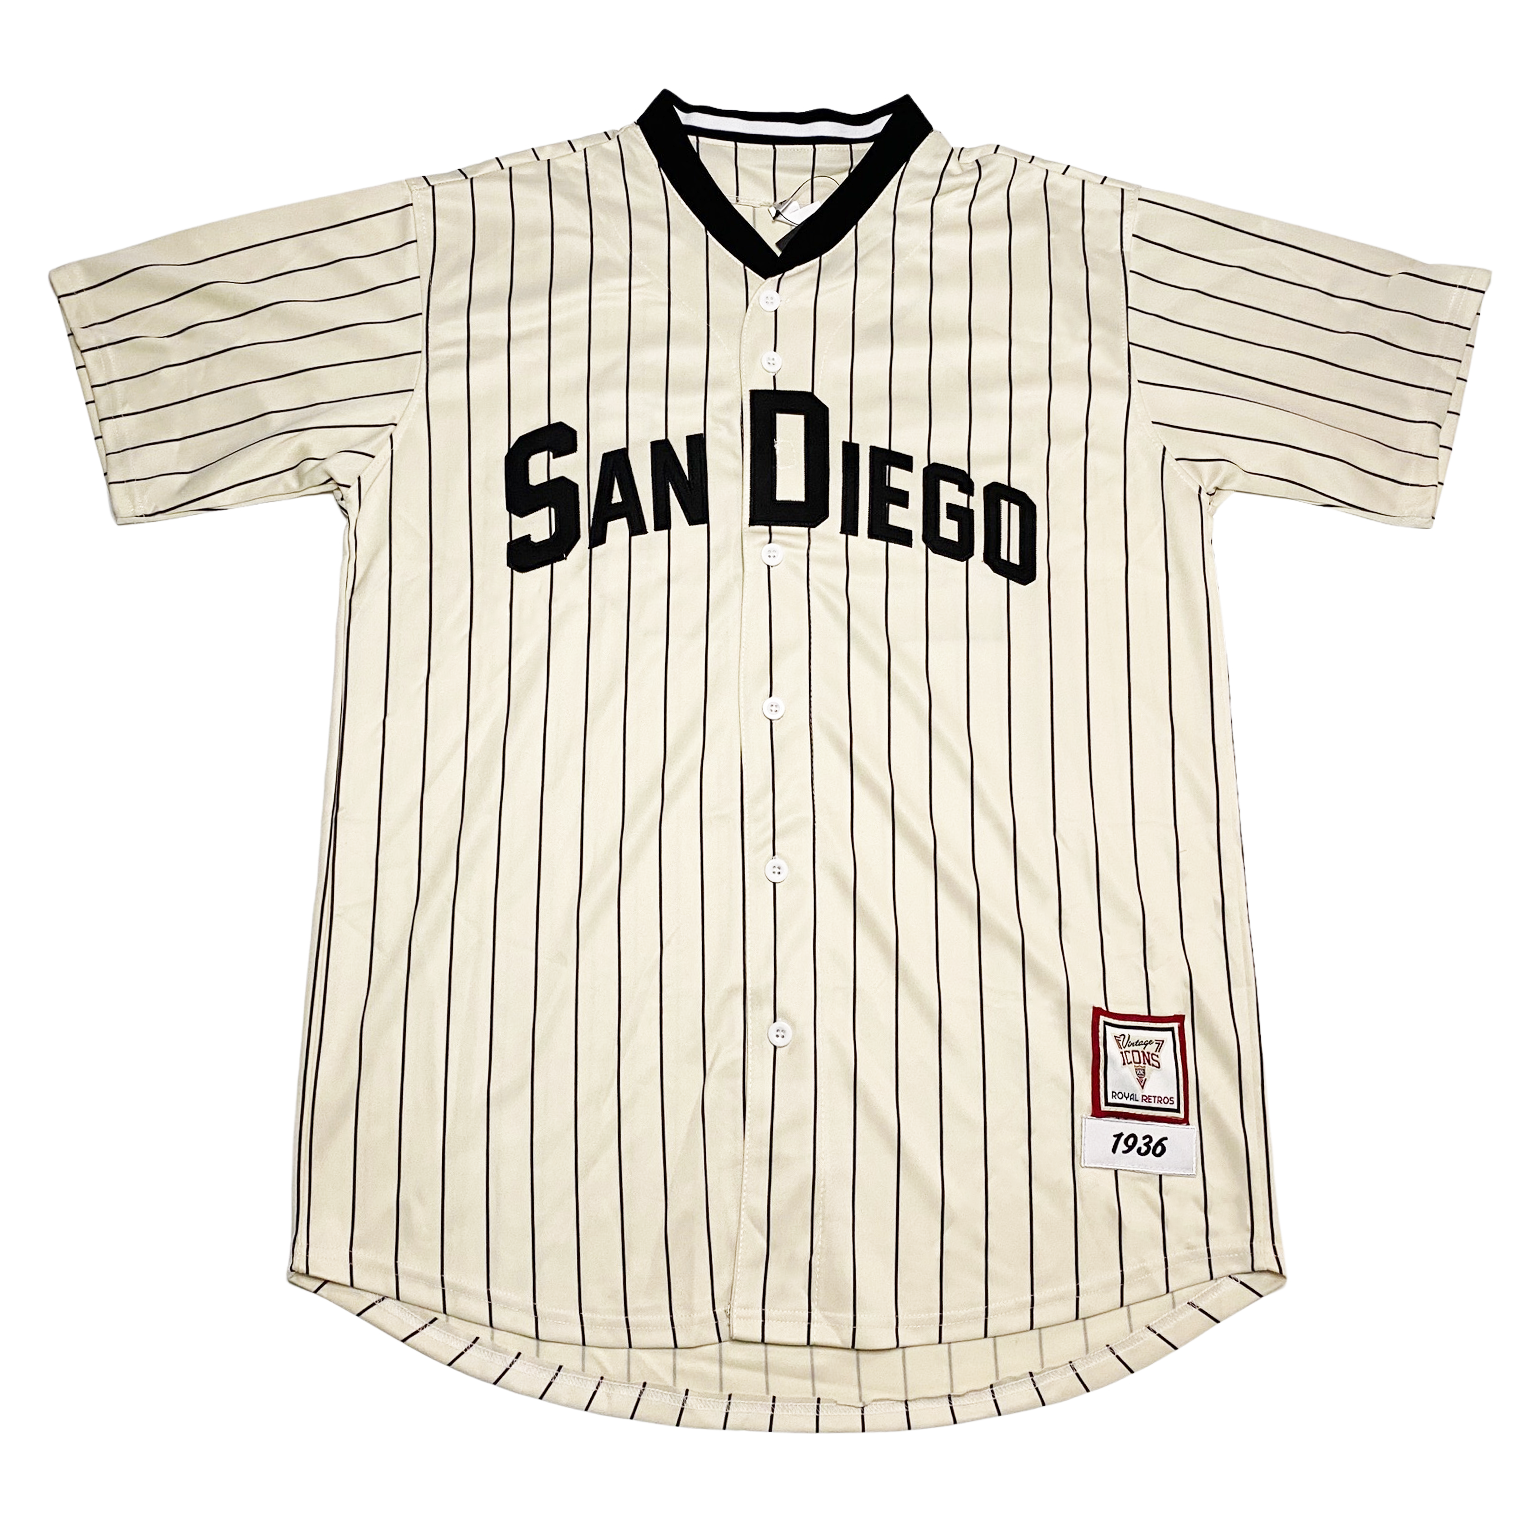 padres home and away jersey